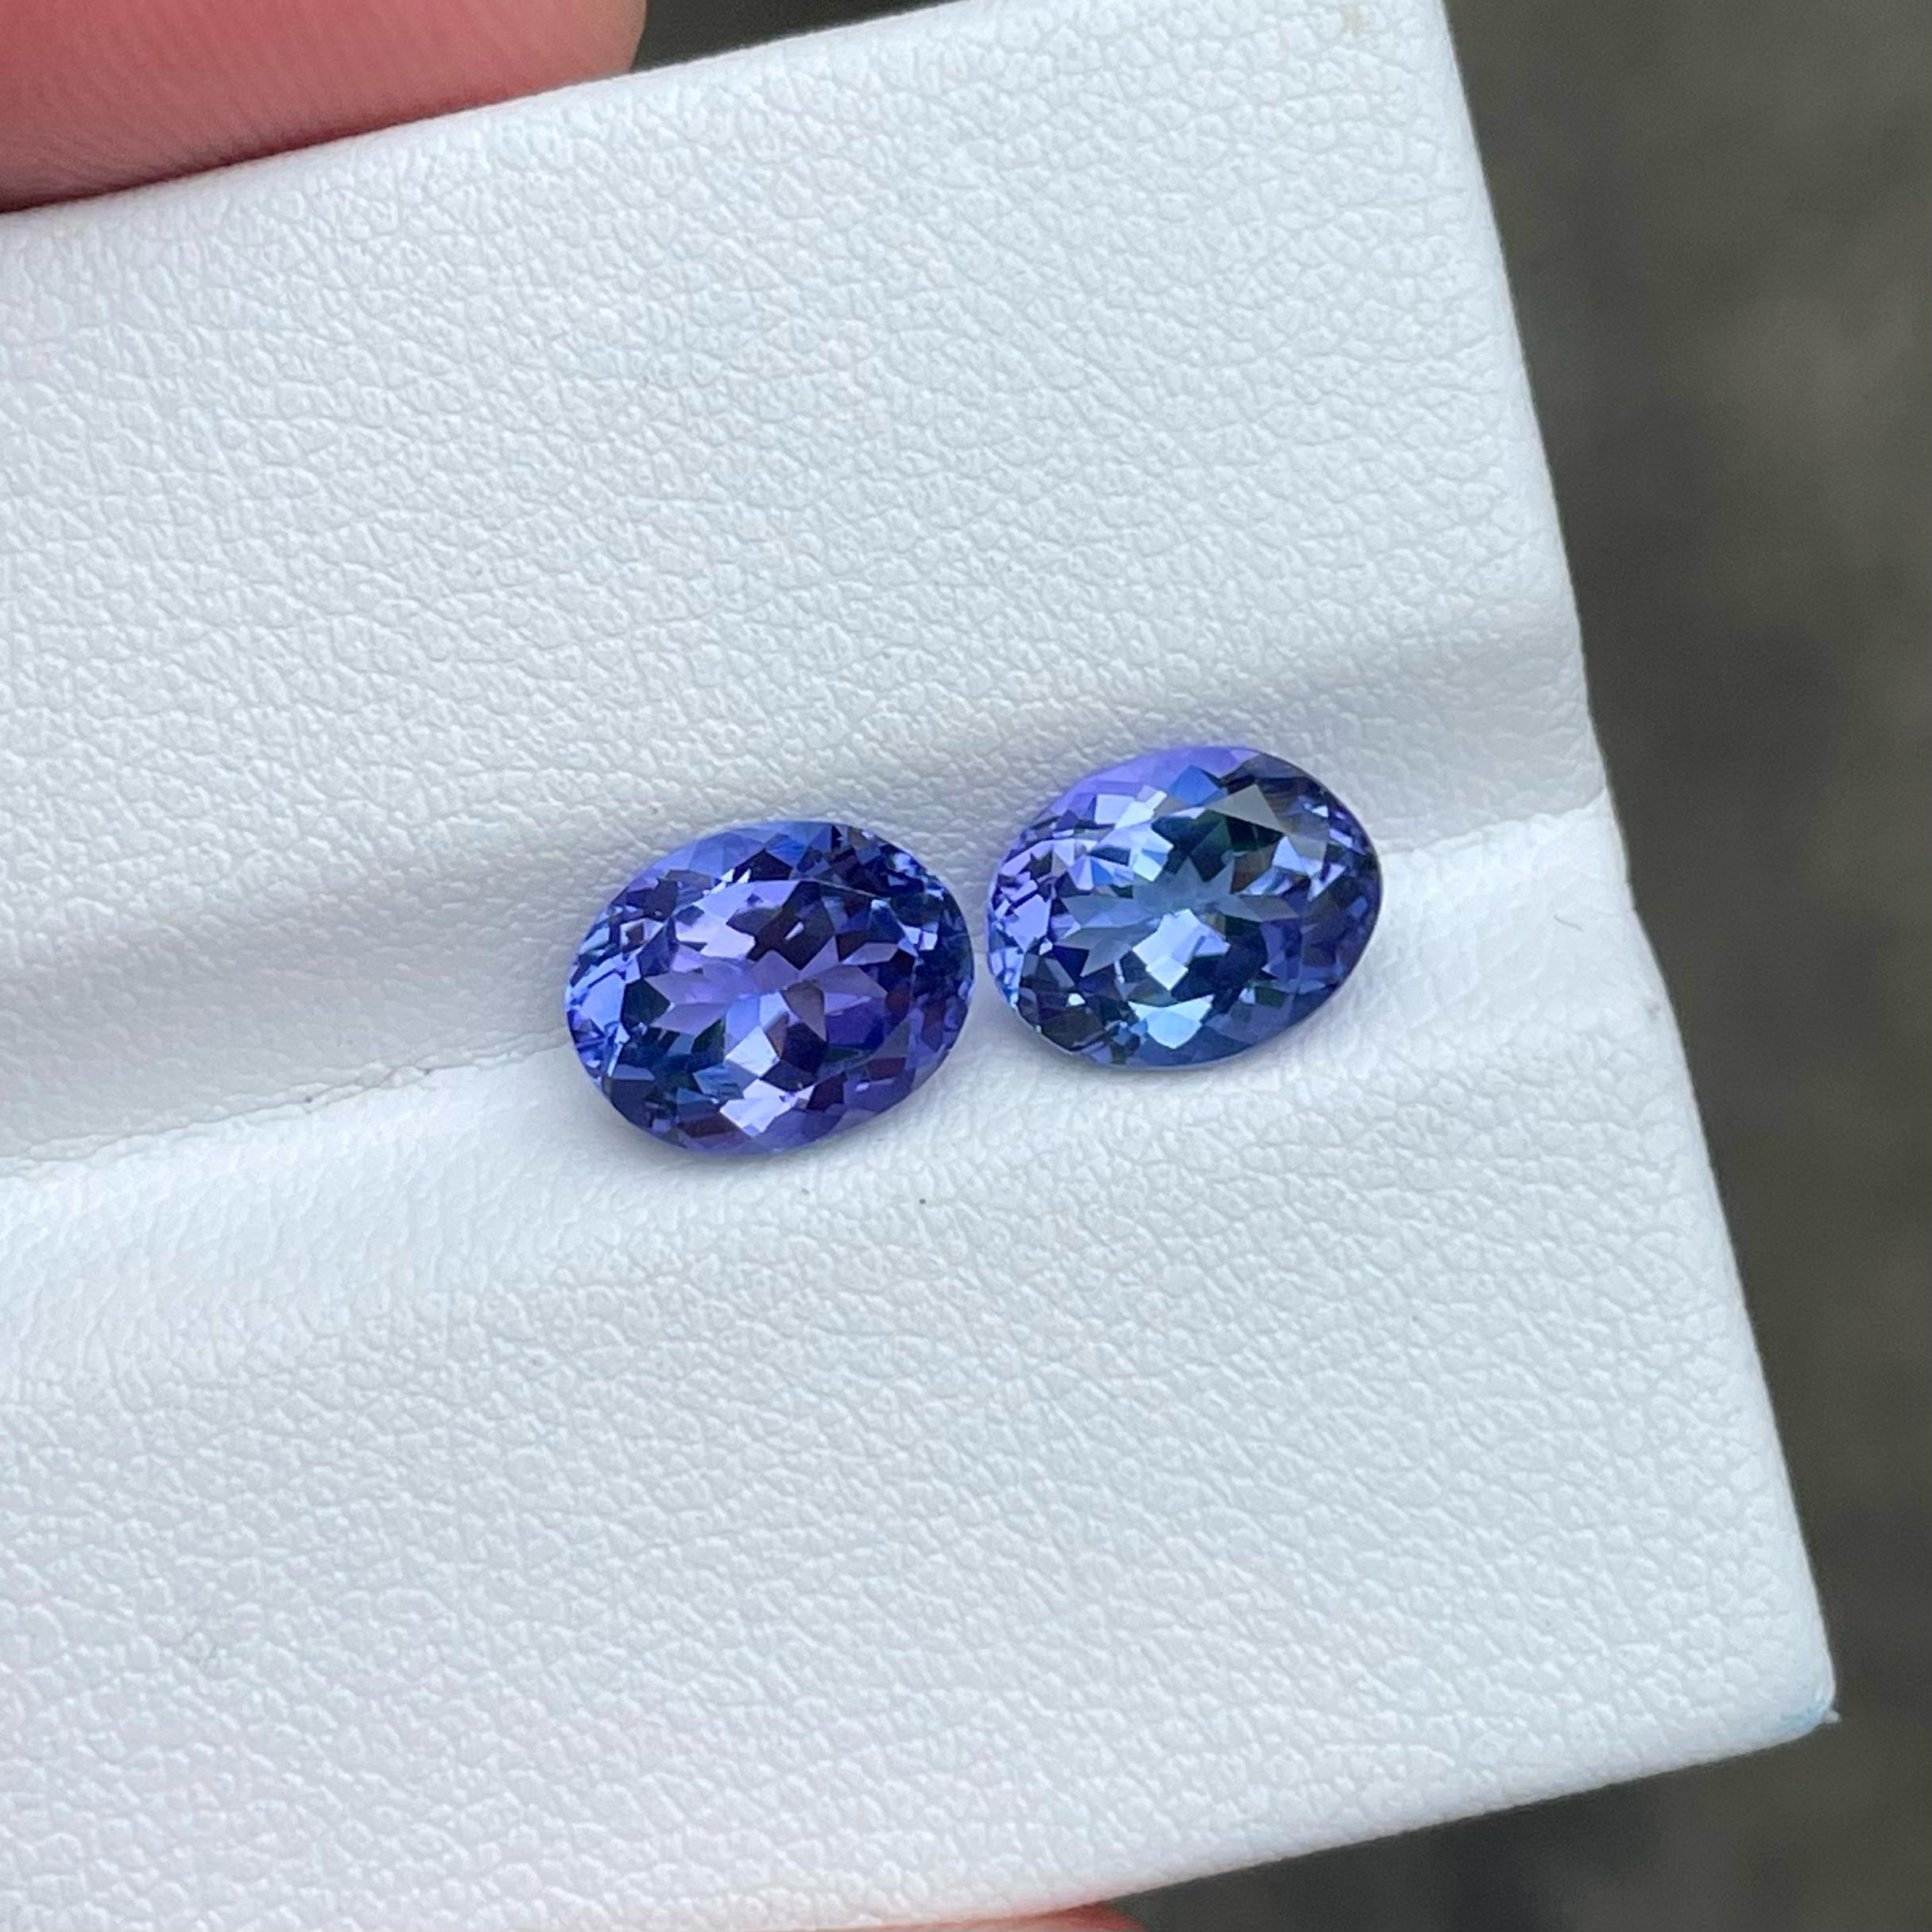 Weight 4.25 carats 
Dimensions 9 x 7 x 5 mm 
Treatment Heated 
Clarity Eye Clean 
Origin Tanzania 
Shape Oval 
Cut Fancy Oval 


Discover a captivating pair of natural Tanzanian gemstones with this exquisite Blue Tanzanite Stone Pair. Each stone